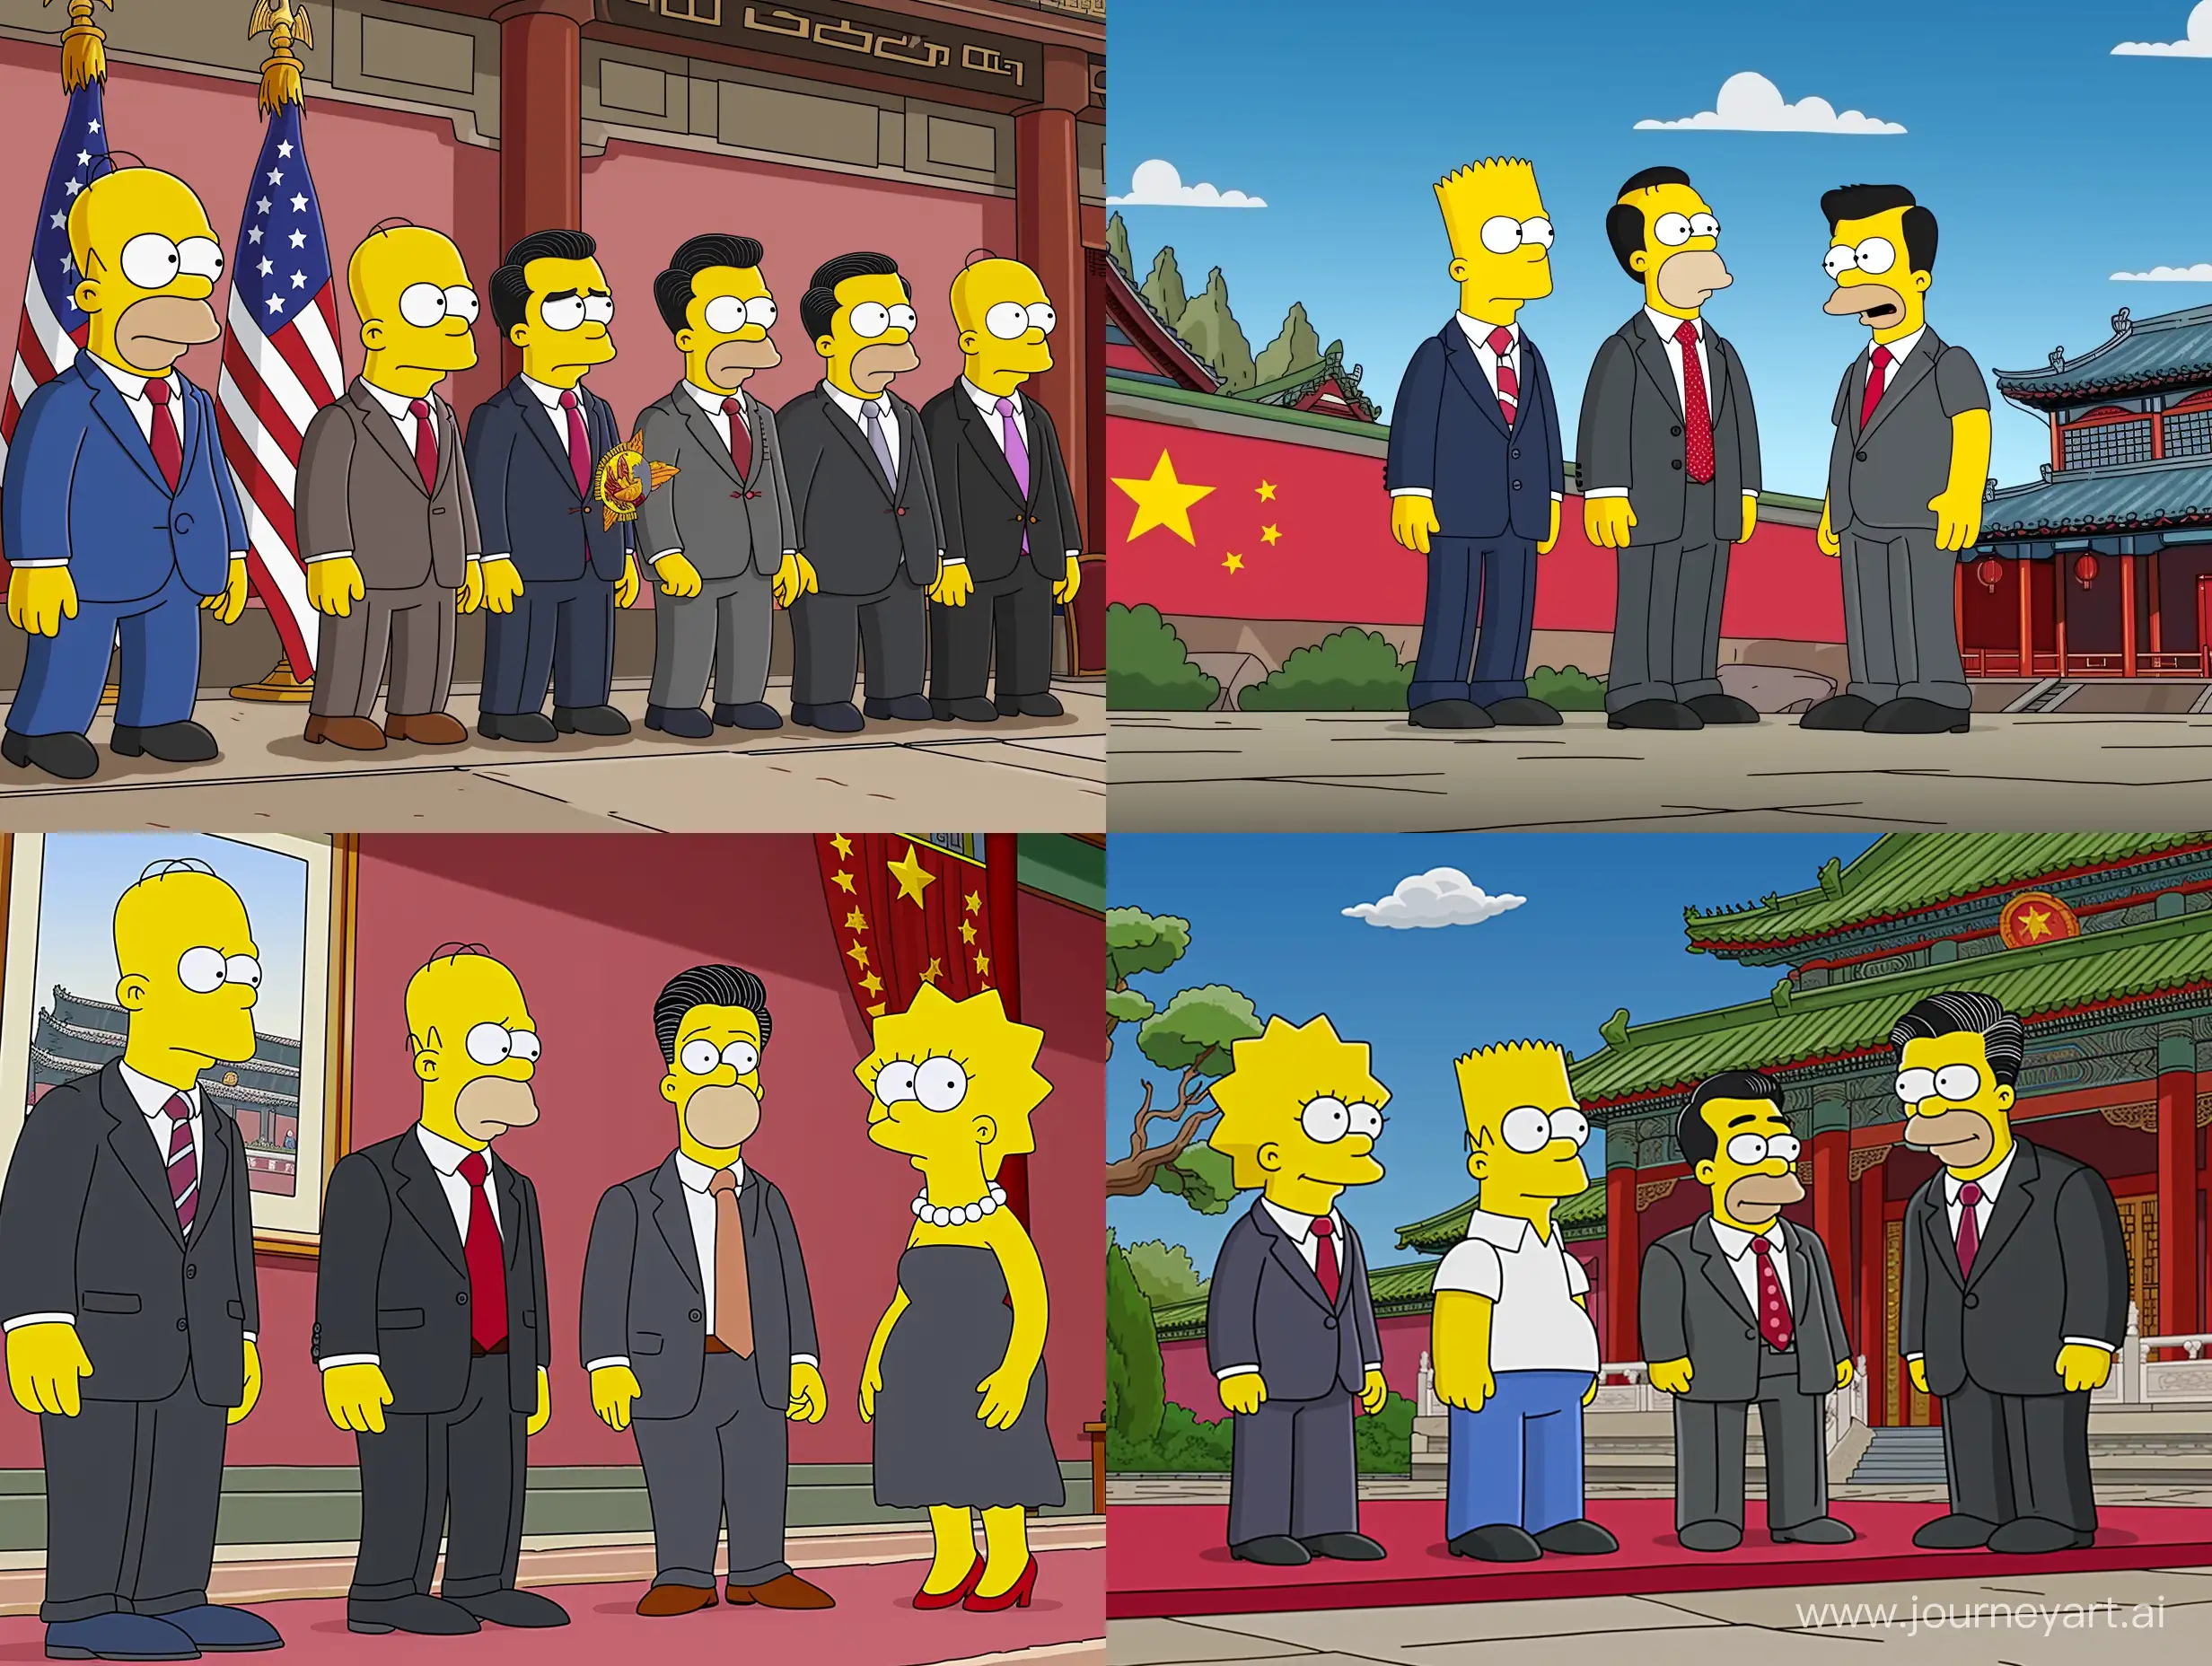 USA-President-and-Chinese-President-Meet-in-Simpsons-Still